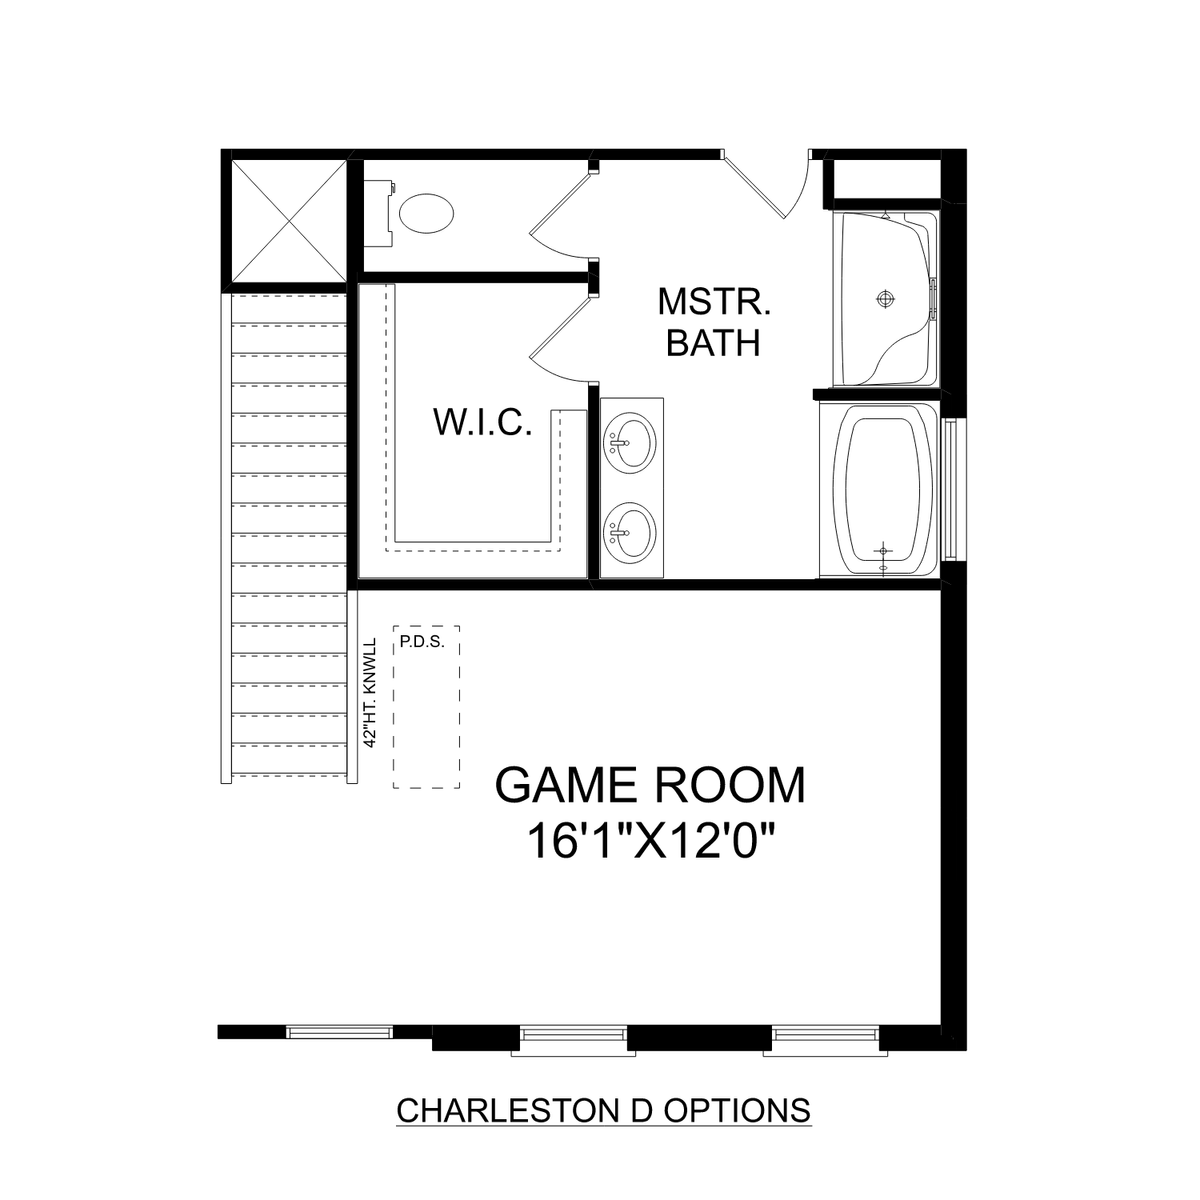 3 - The Charleston D buildable floor plan layout in Davidson Homes' Ivy Hills community.